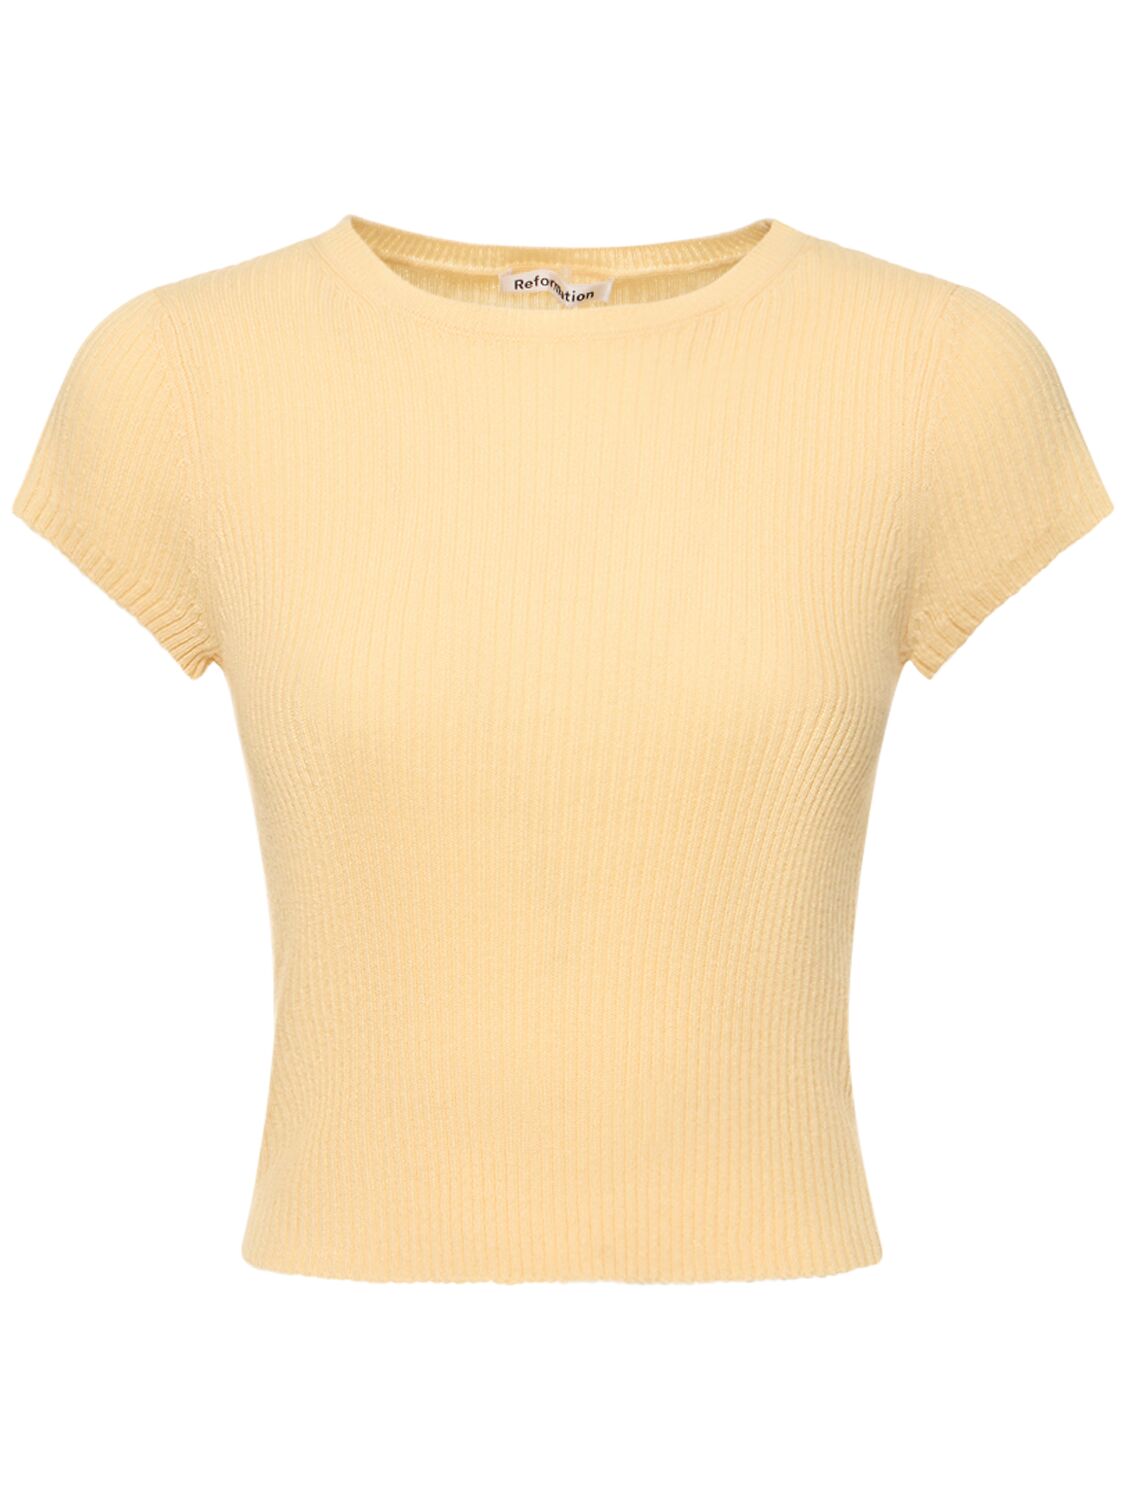 Reformation Teo Short Sleeve Cashmere Sweater In Yellow